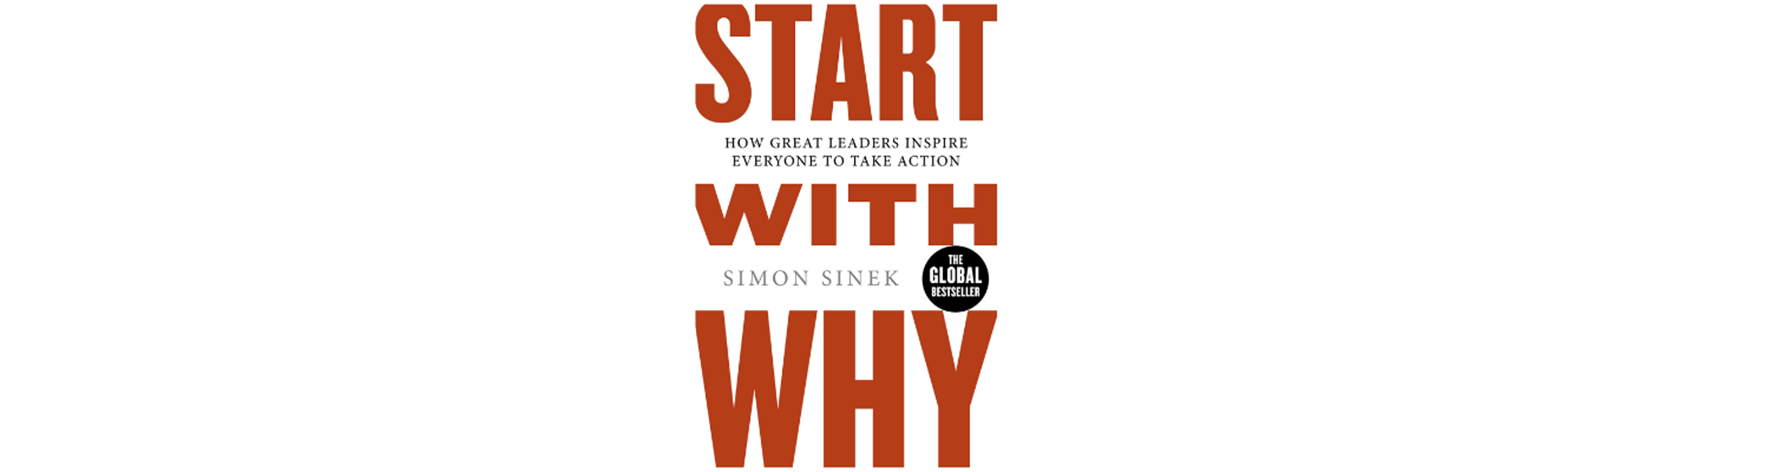 Start with the why